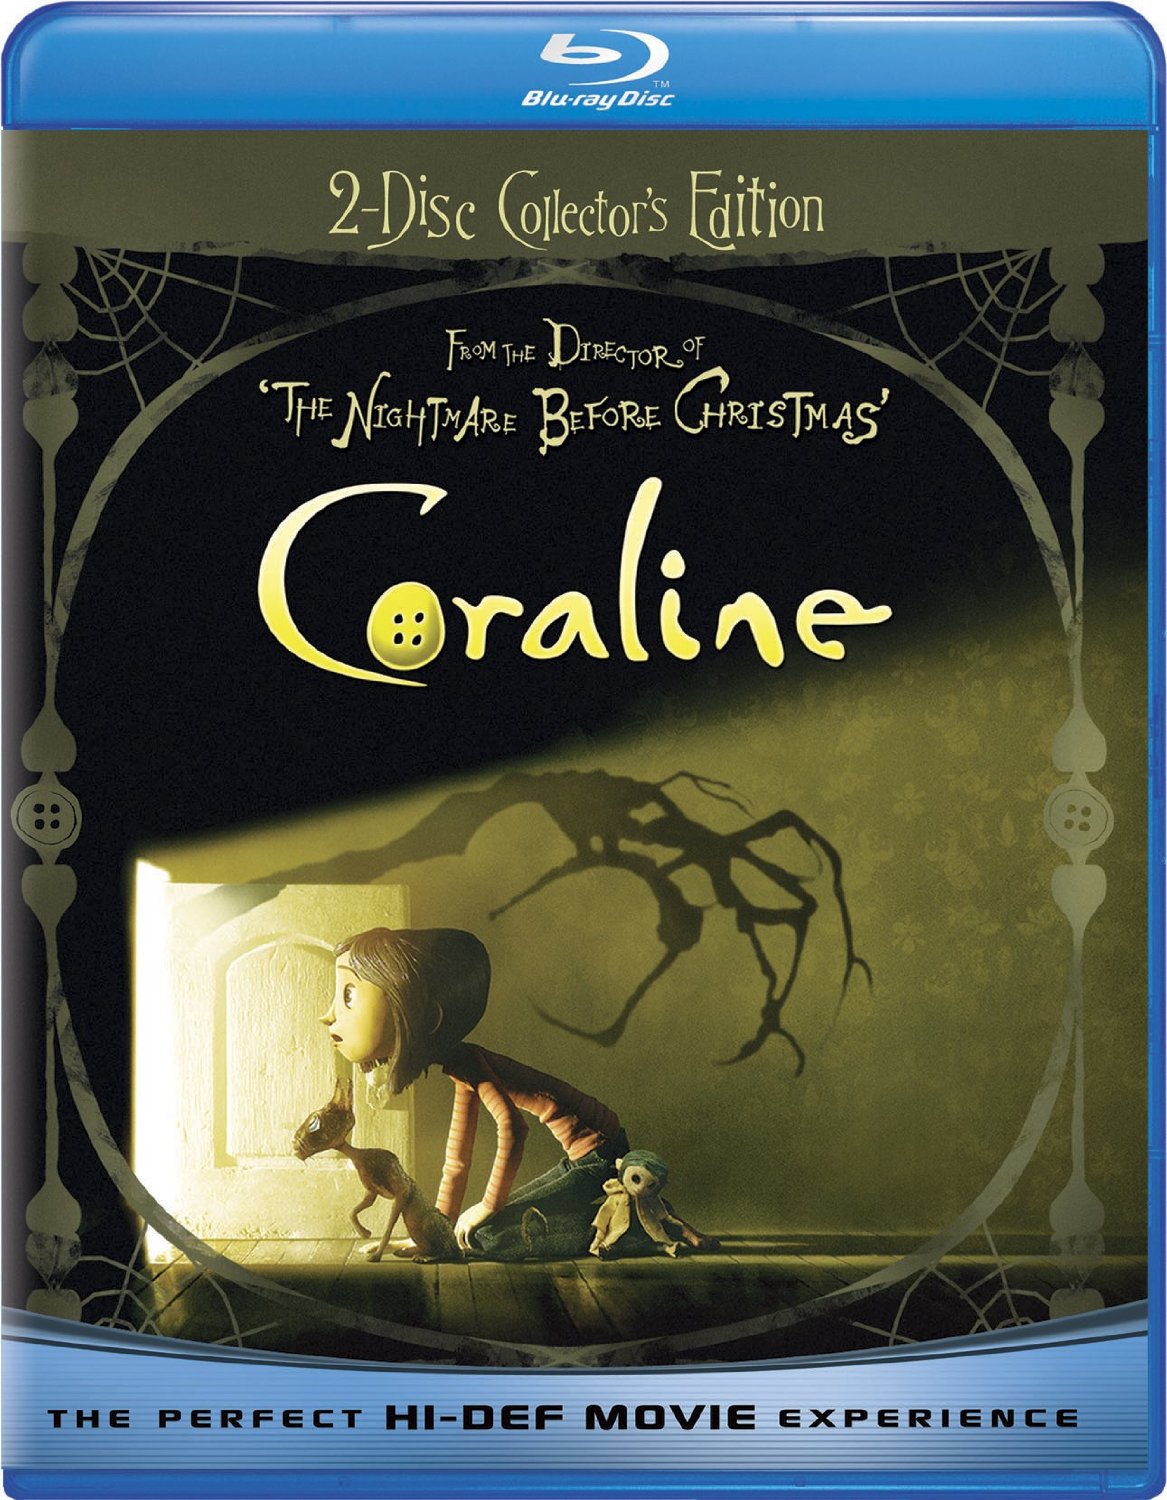 Coraline Collector’s Edition Blu-ray Combo Pack Only $8.37 (Reg. $19.98)